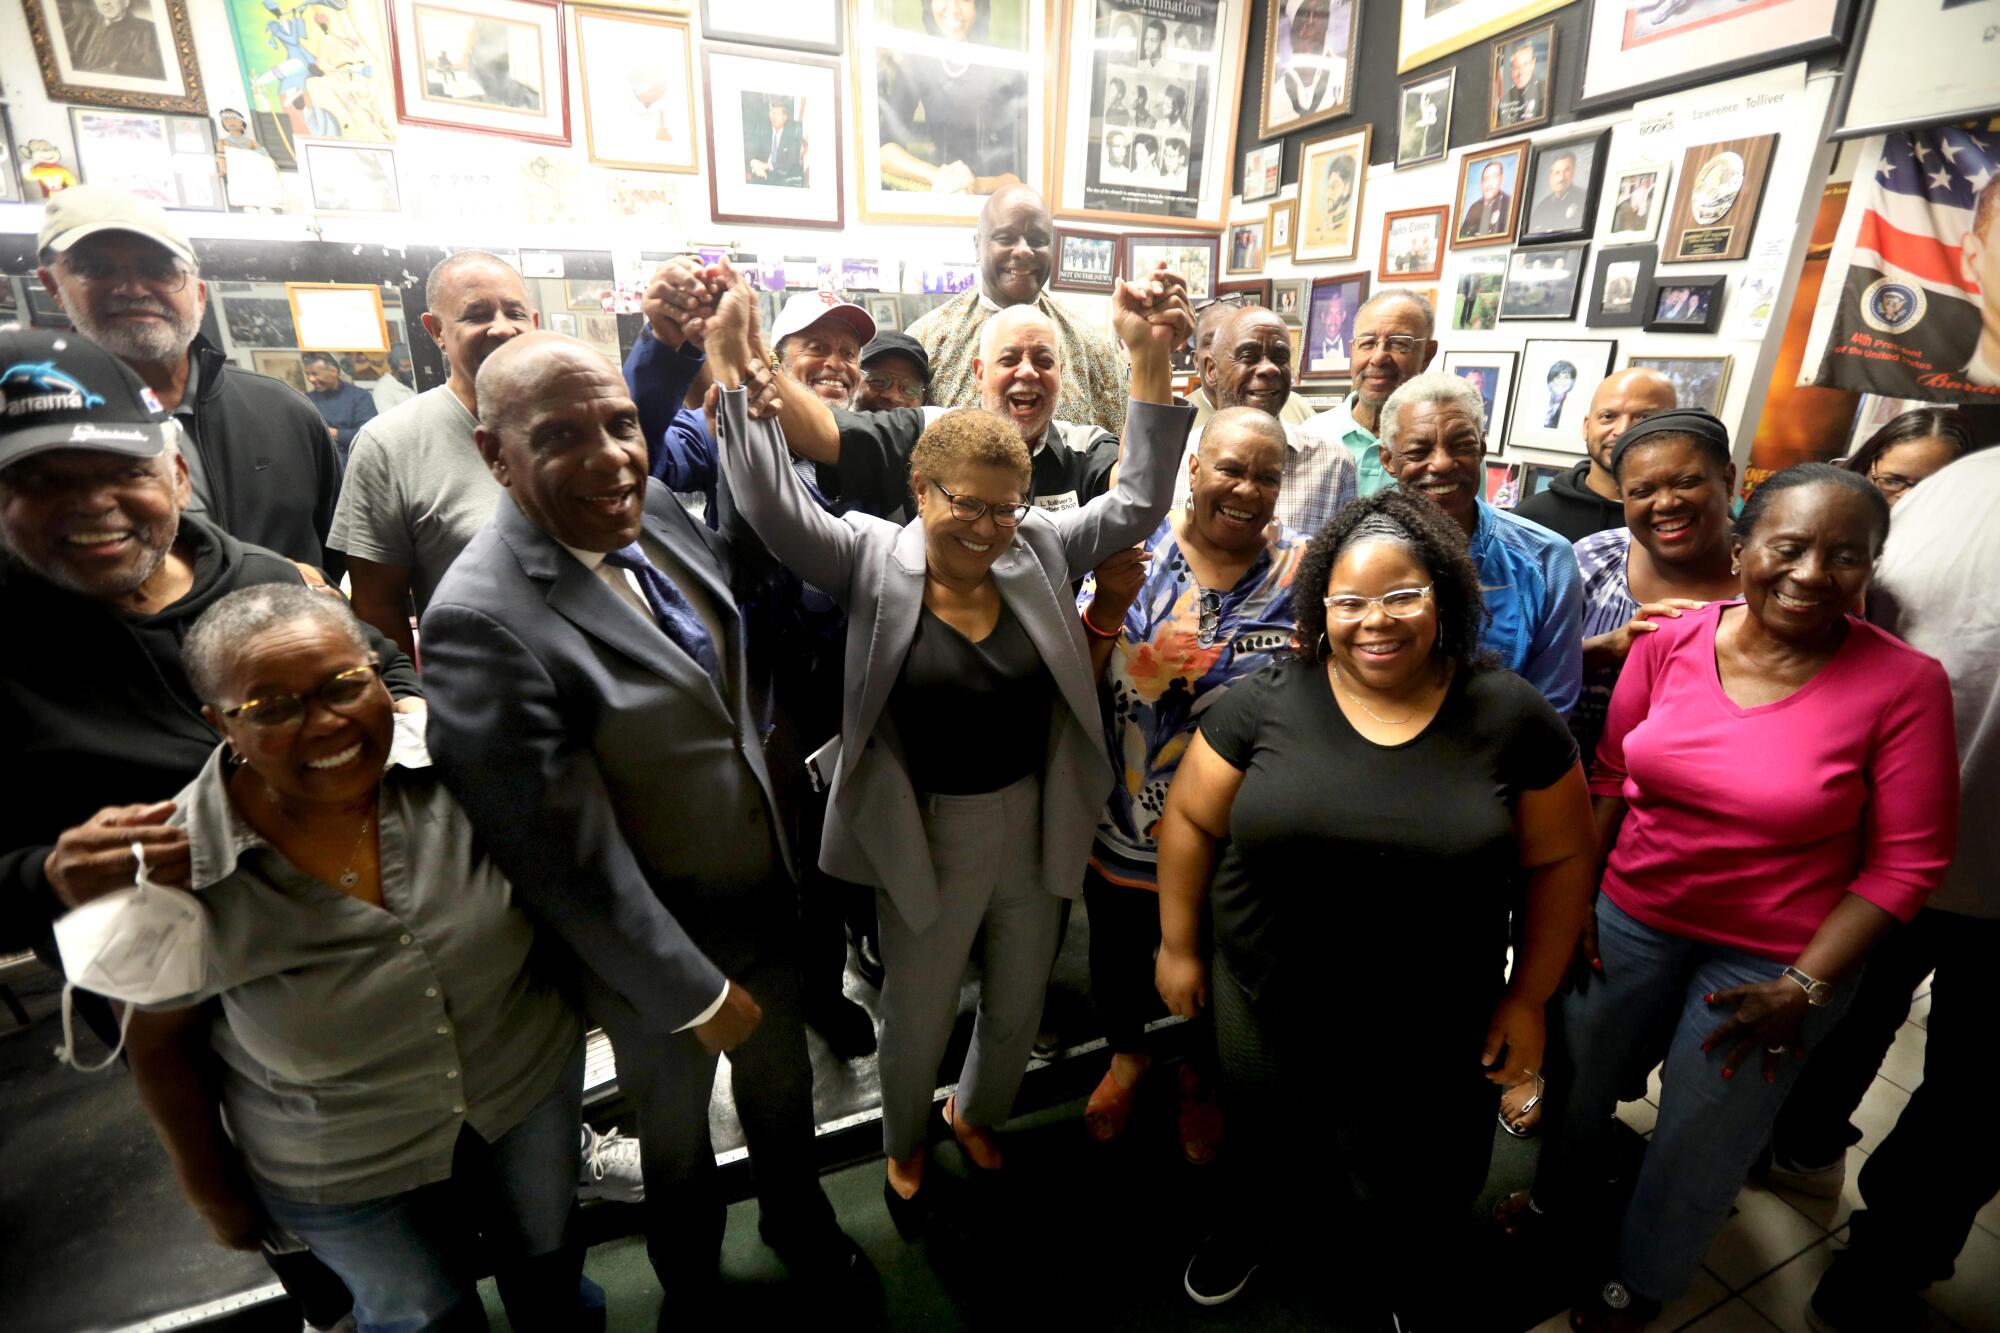 Supporters raise Karen Bass' hands over her head as others surround her in a room covered in portraits and other art.